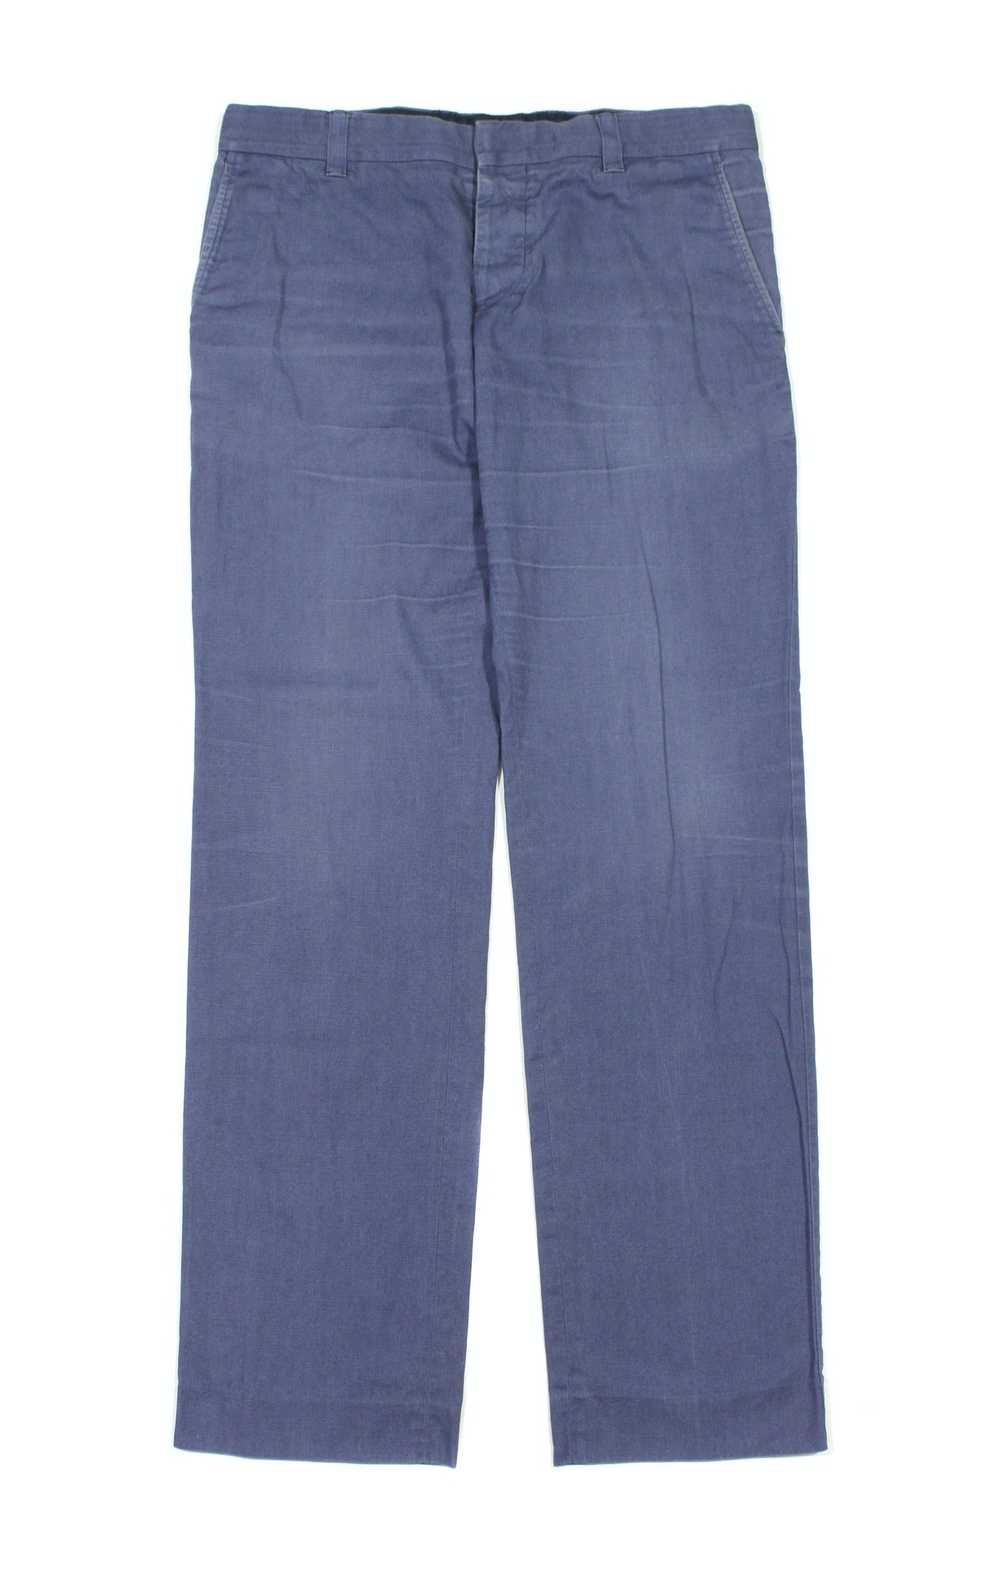 Gucci 2010 Cotton Pants Skinny Fit - image 1